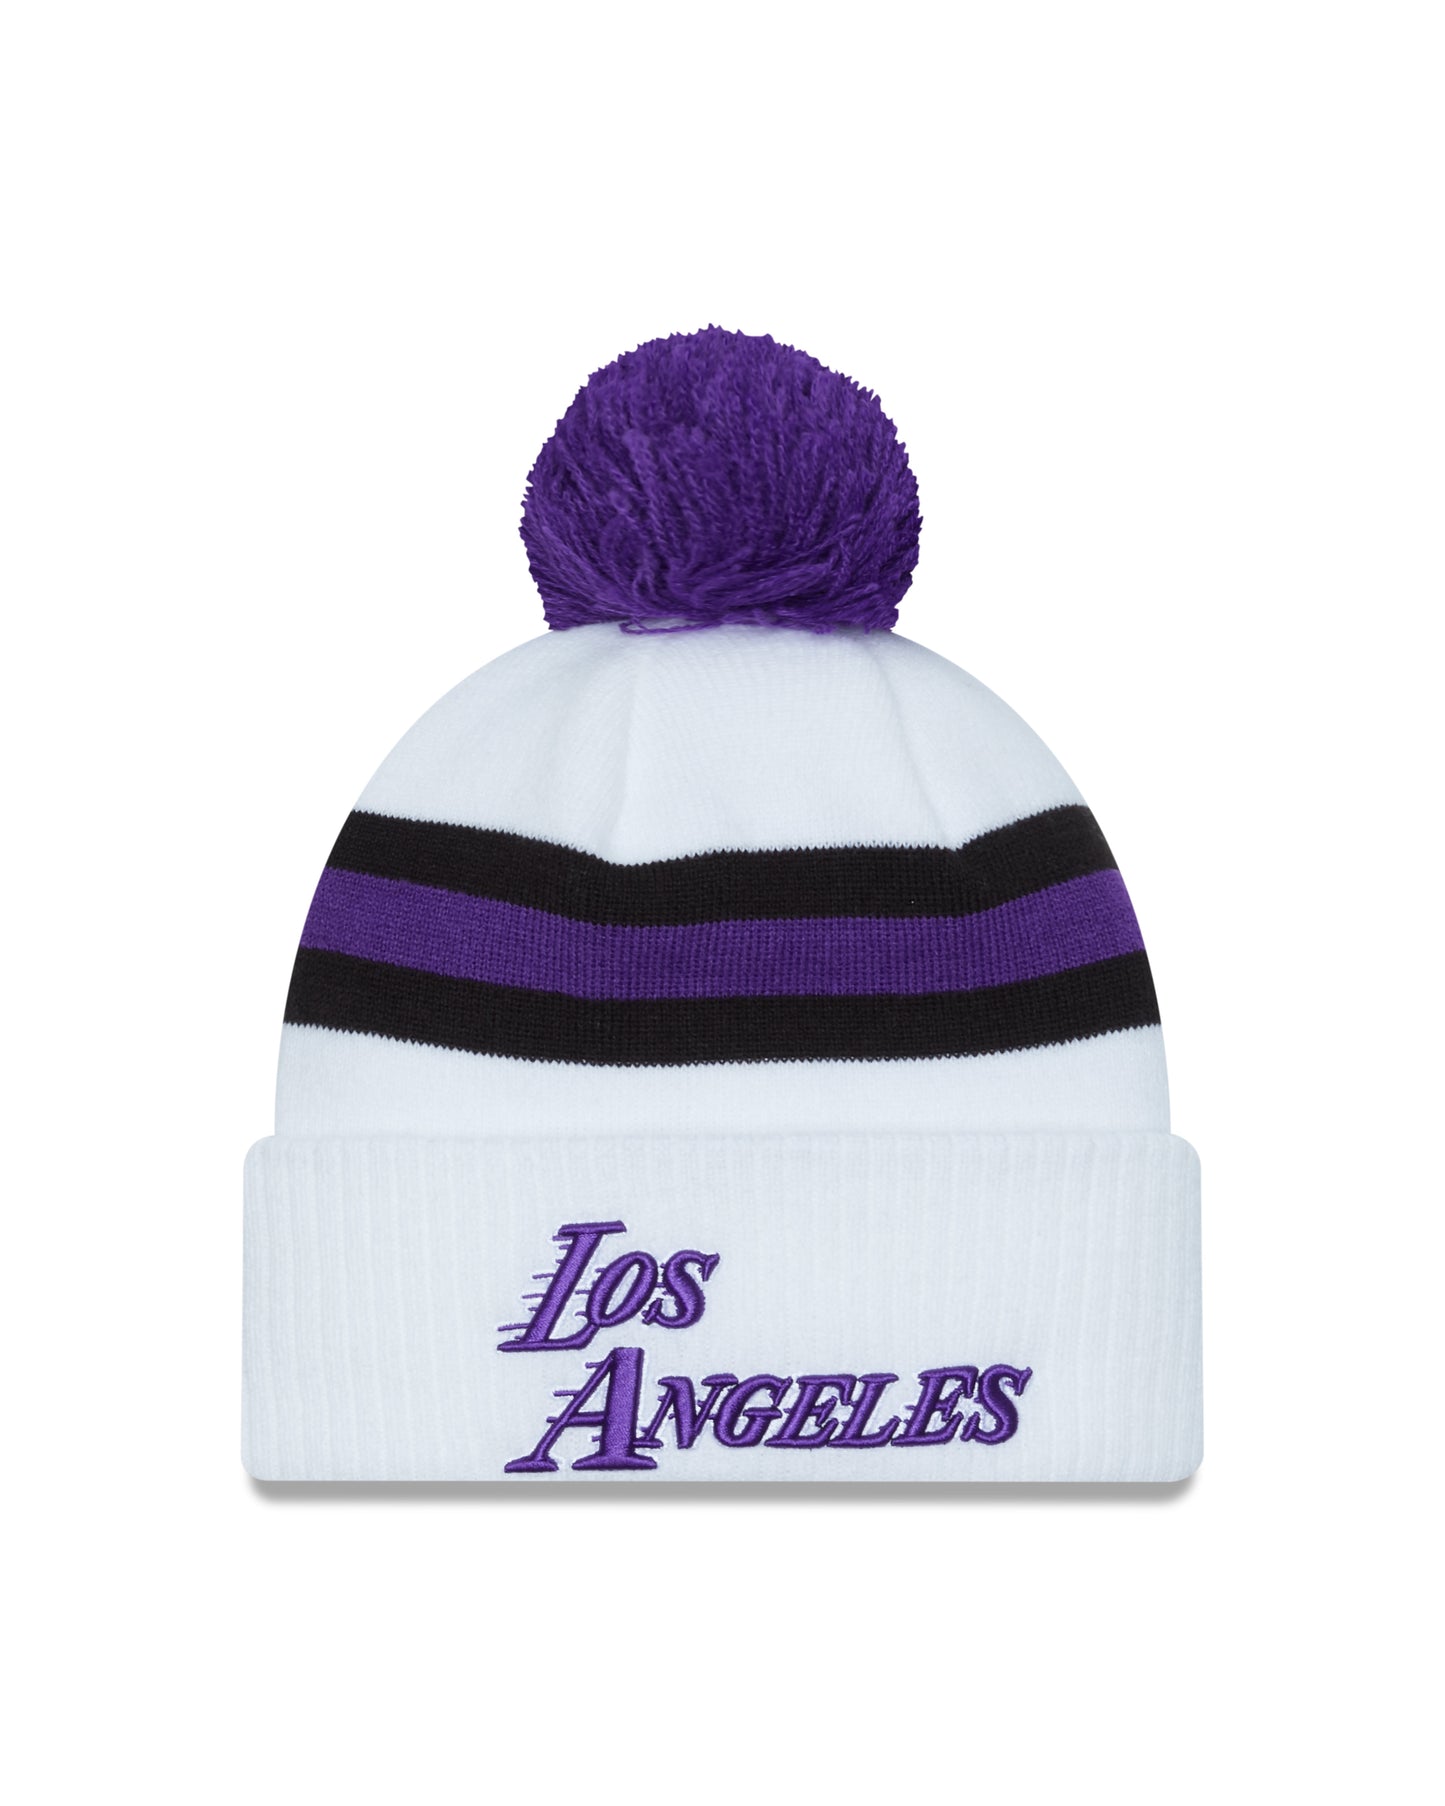 Los Angeles Lakers New Era City Edition Knit Hat